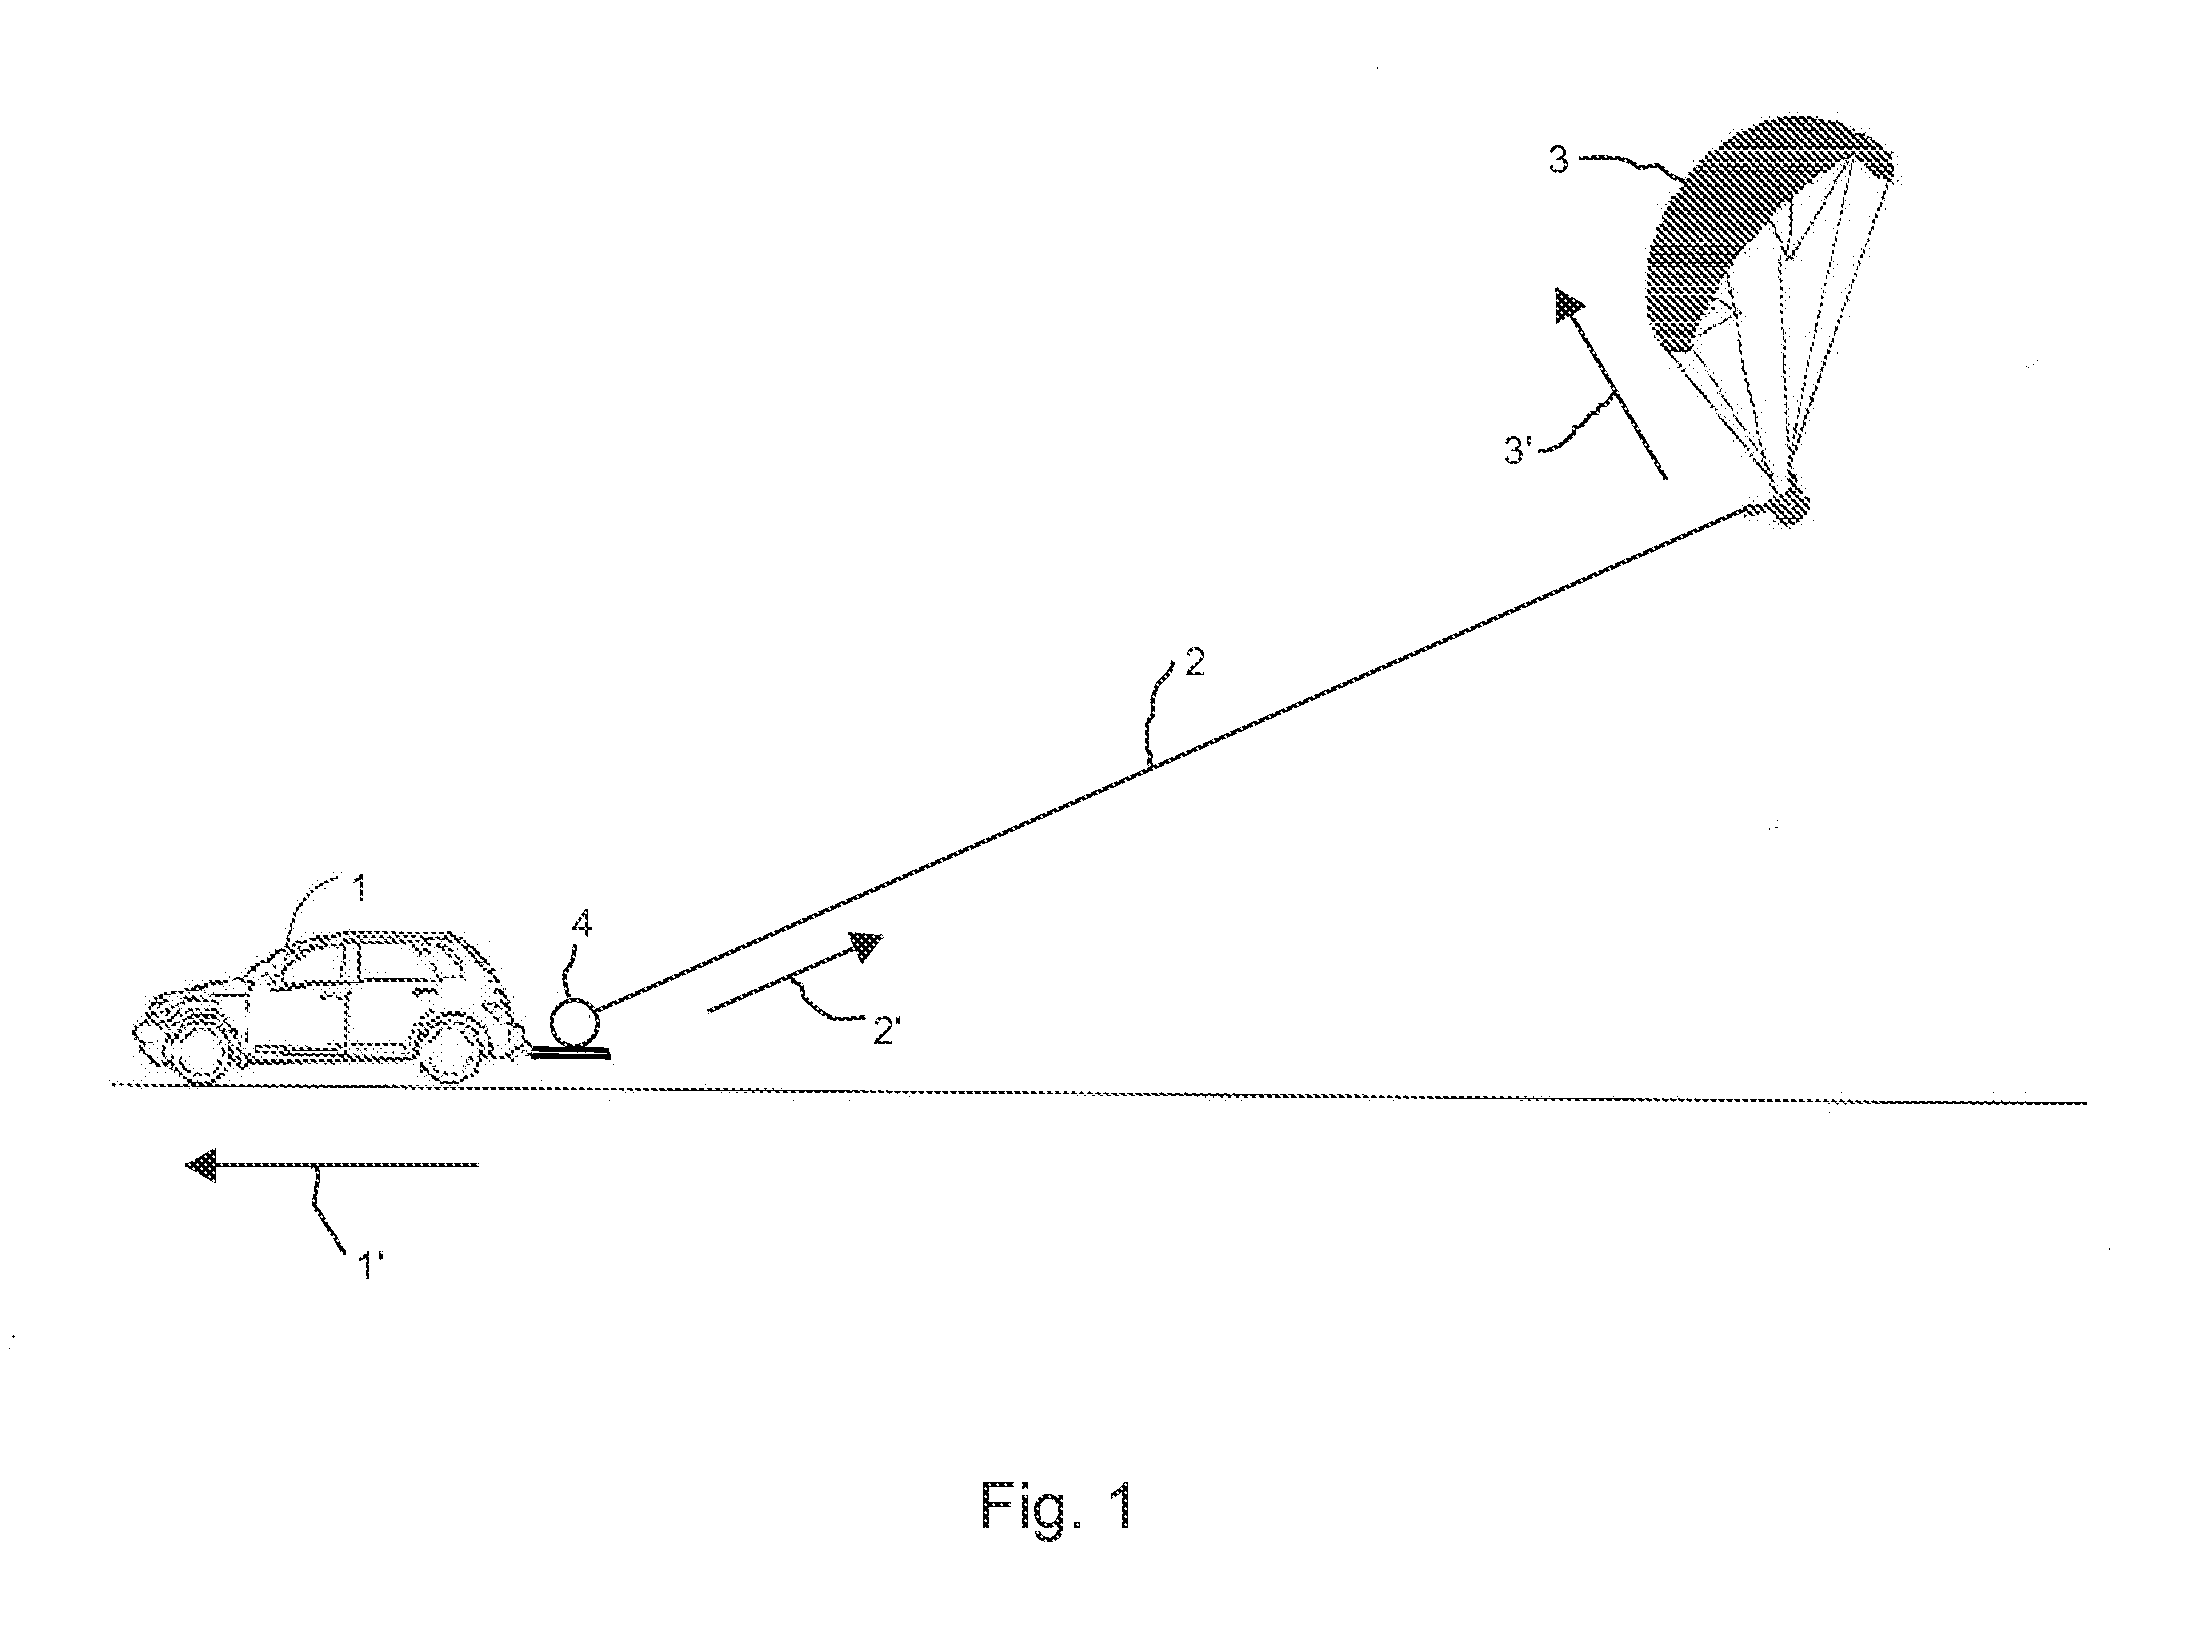 Electromagnetic Tow System For Nonpowered Ultralight Aircraft